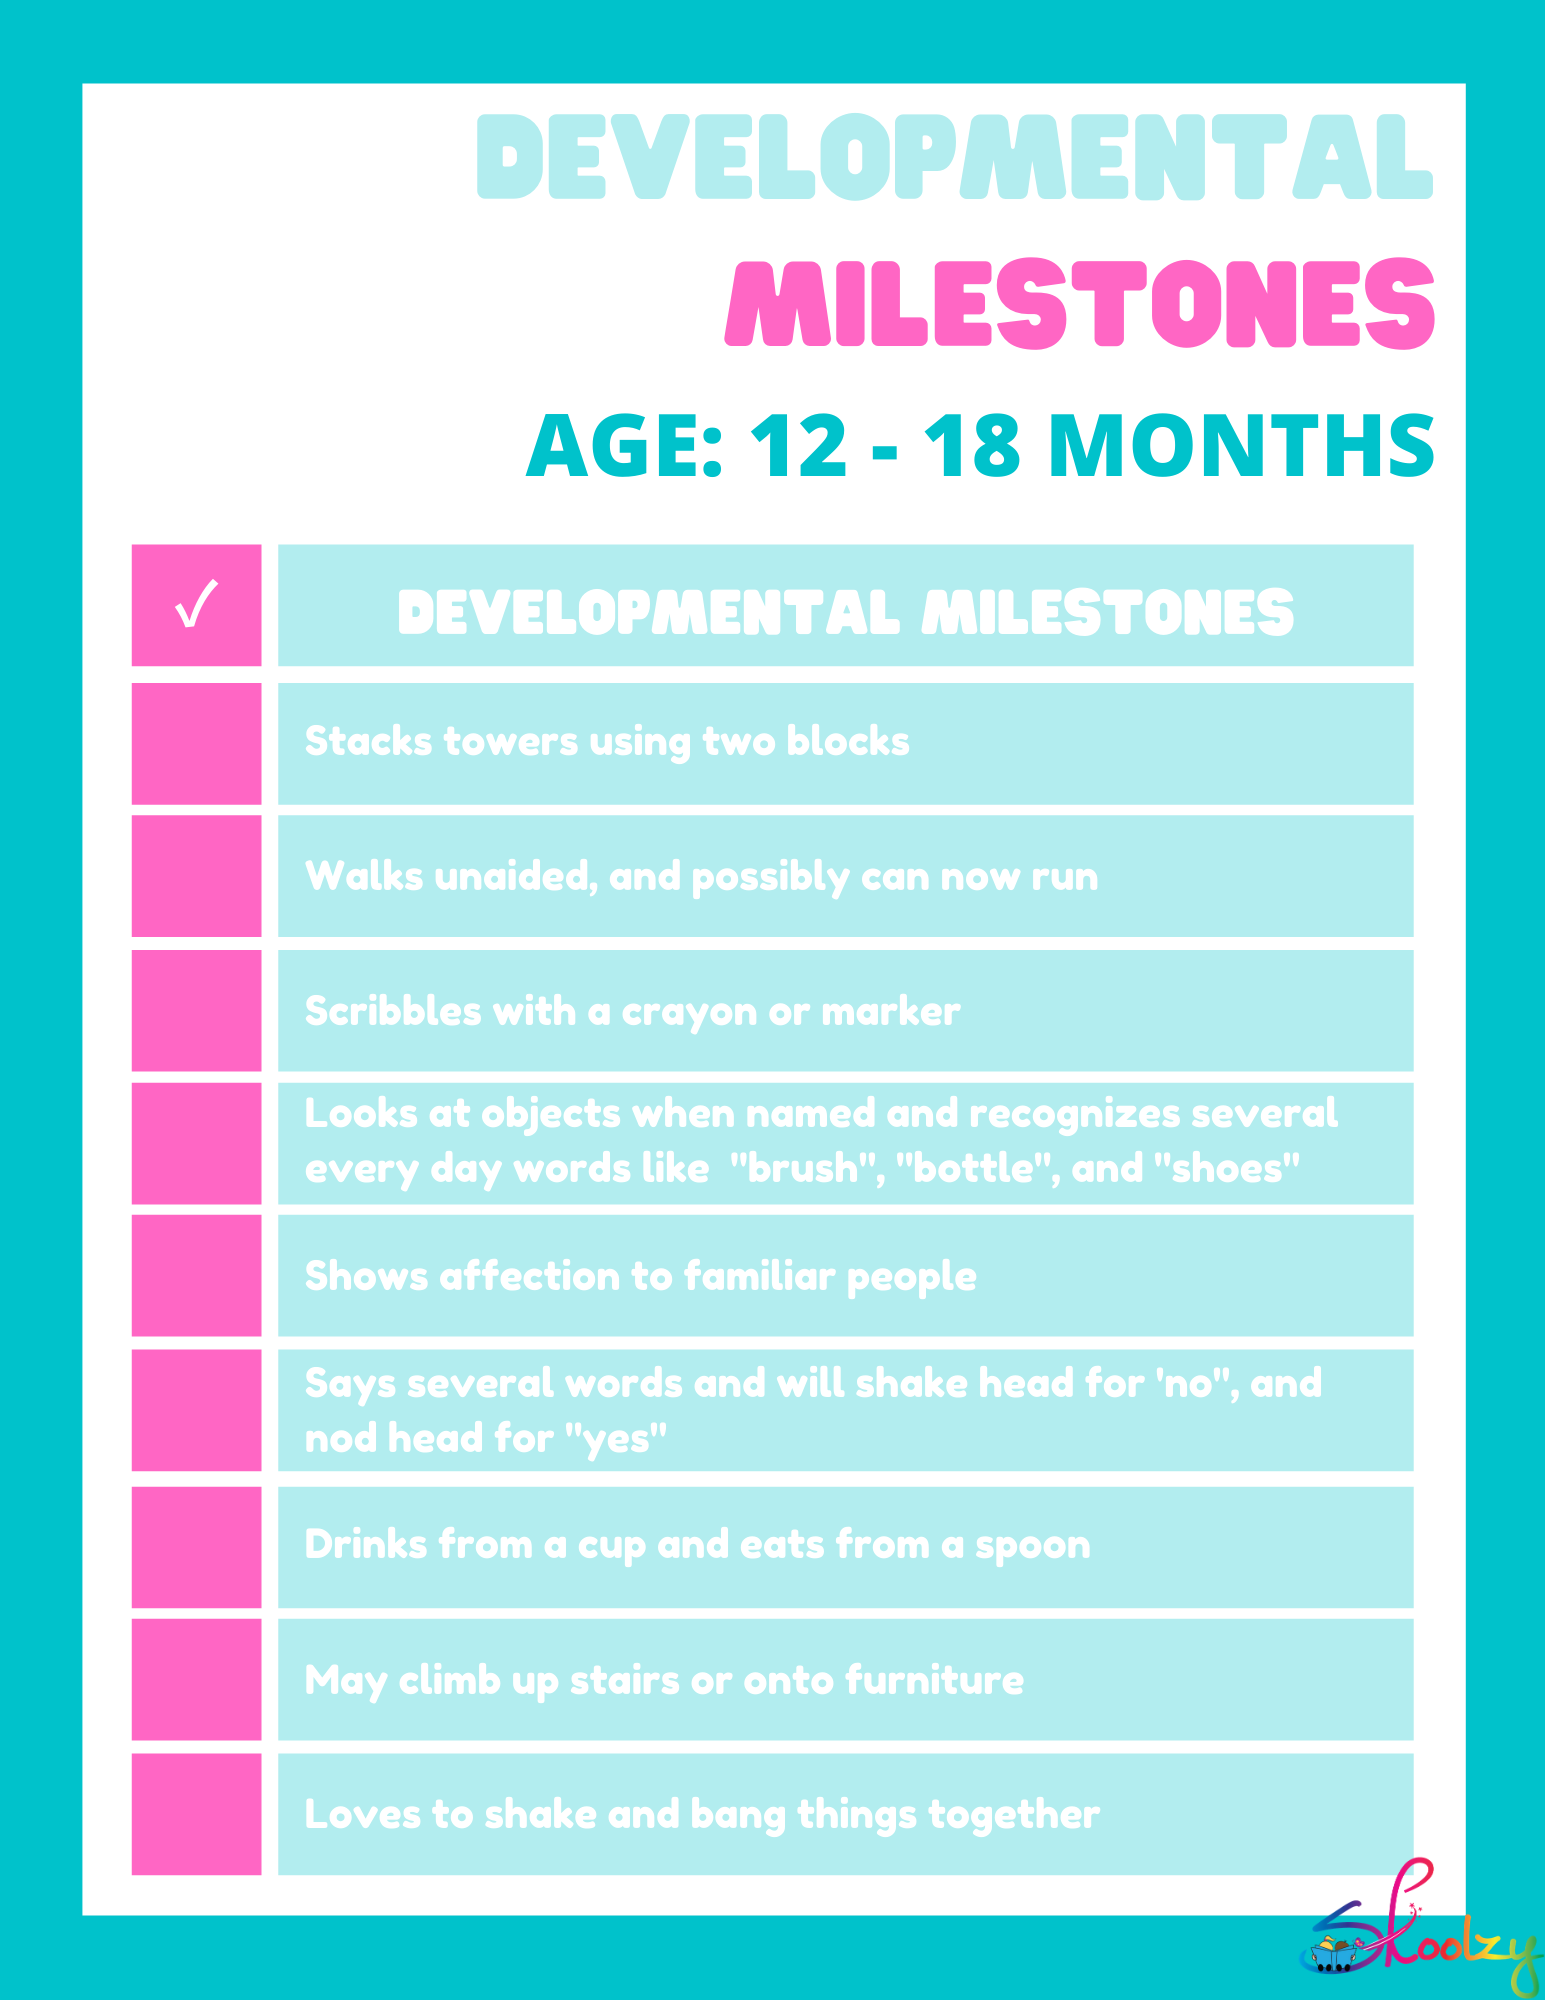 Jumping milestones for children 18 months to 5+ years